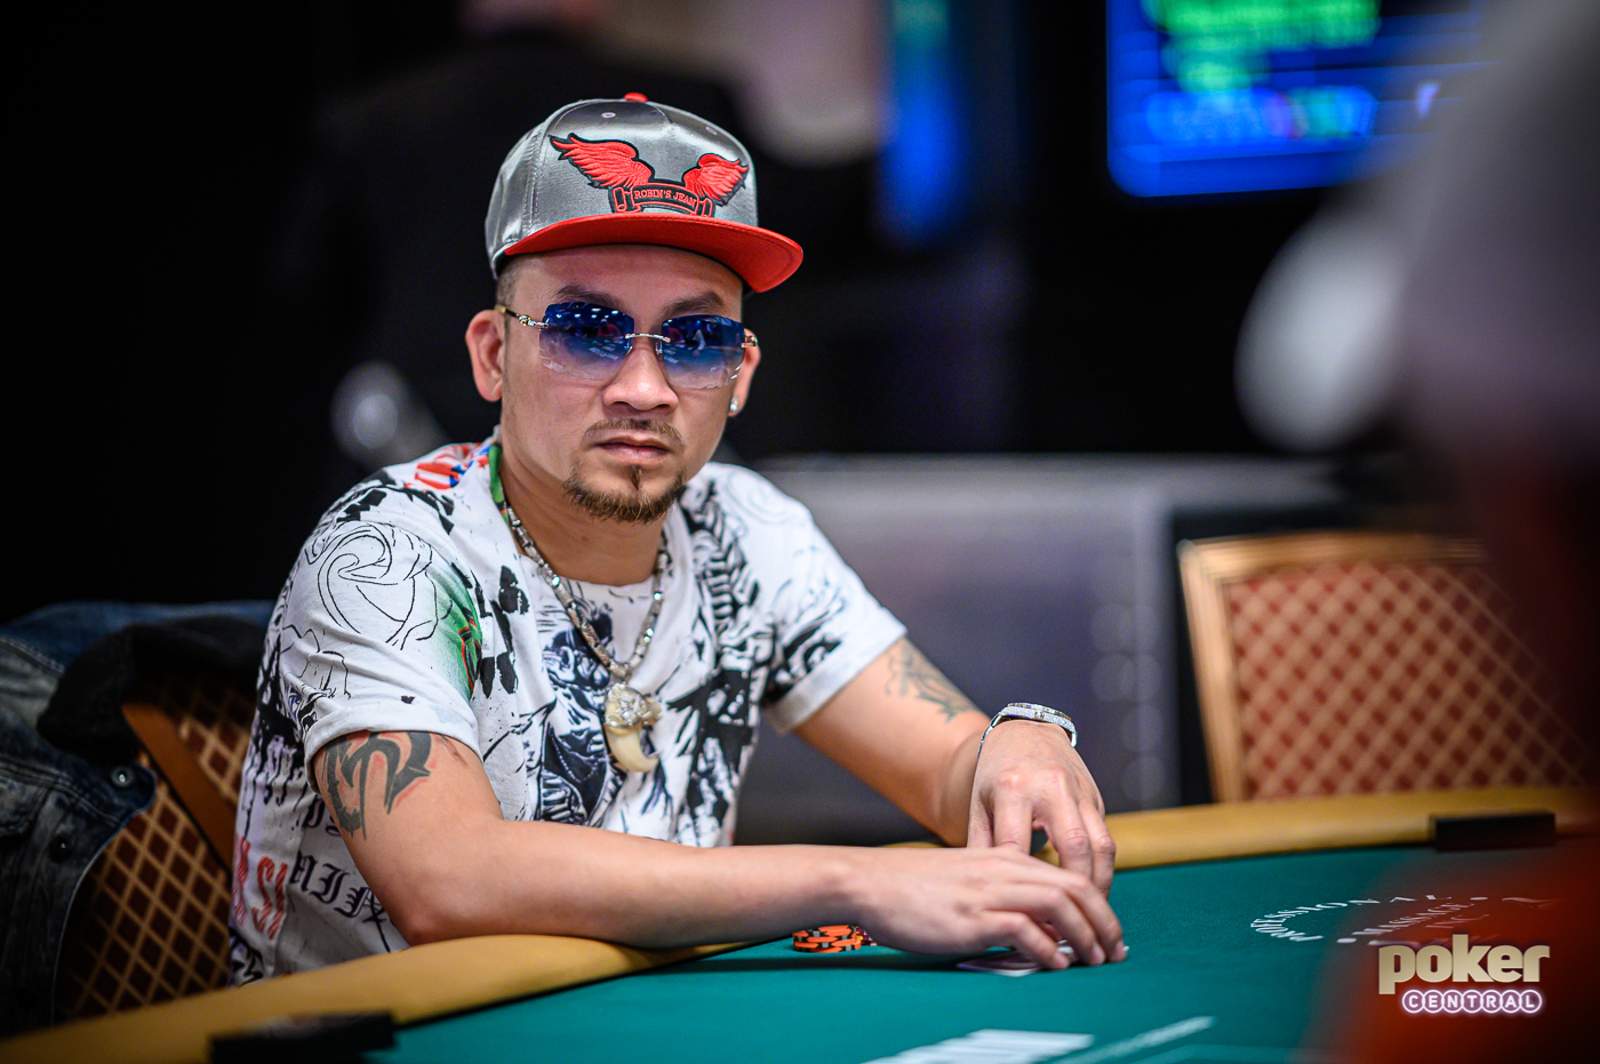 WSOP Main Event Day 1a Drama as Qui Nguyen Bags a Big Stack, Alex Foxen Goes on the Attack & Chris Moneymaker Rides the Rollercoaster